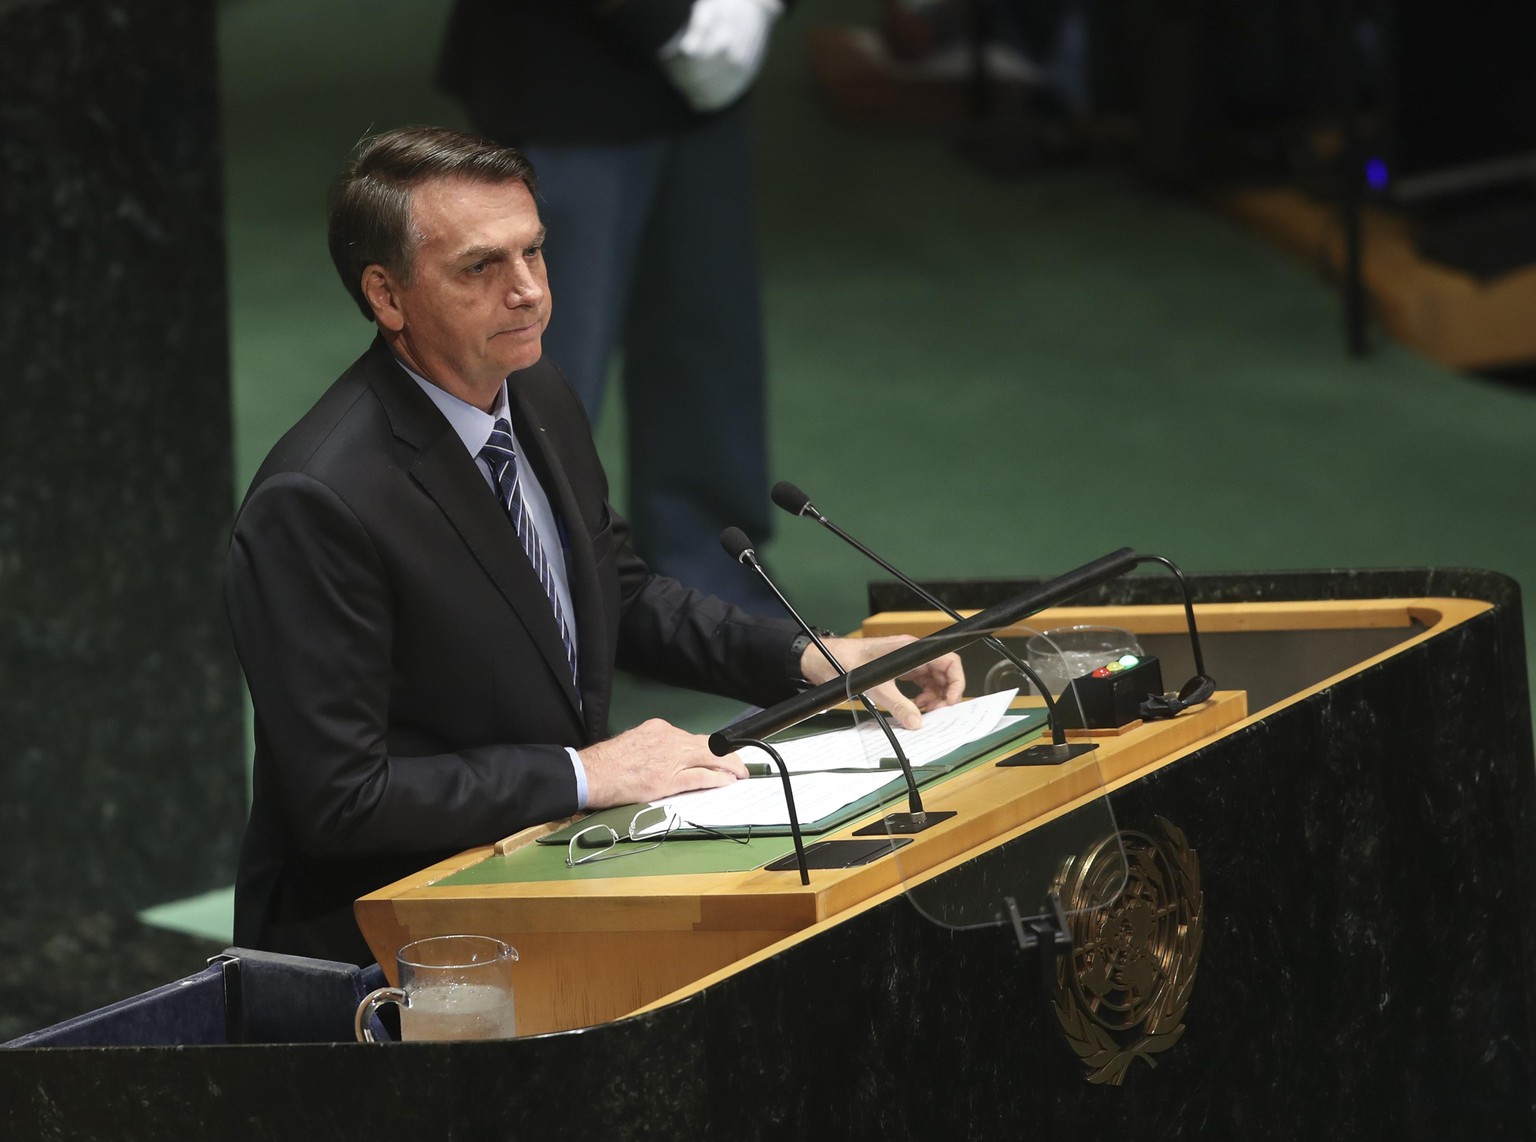 NEW YORK, USA - (ARCHIVE): A file photo dated September 24, 2019 shows President of Brazil Jair Bolsonaro speaking at the 74th session of United Nations General Assembly at UN Headquarters in New York ...